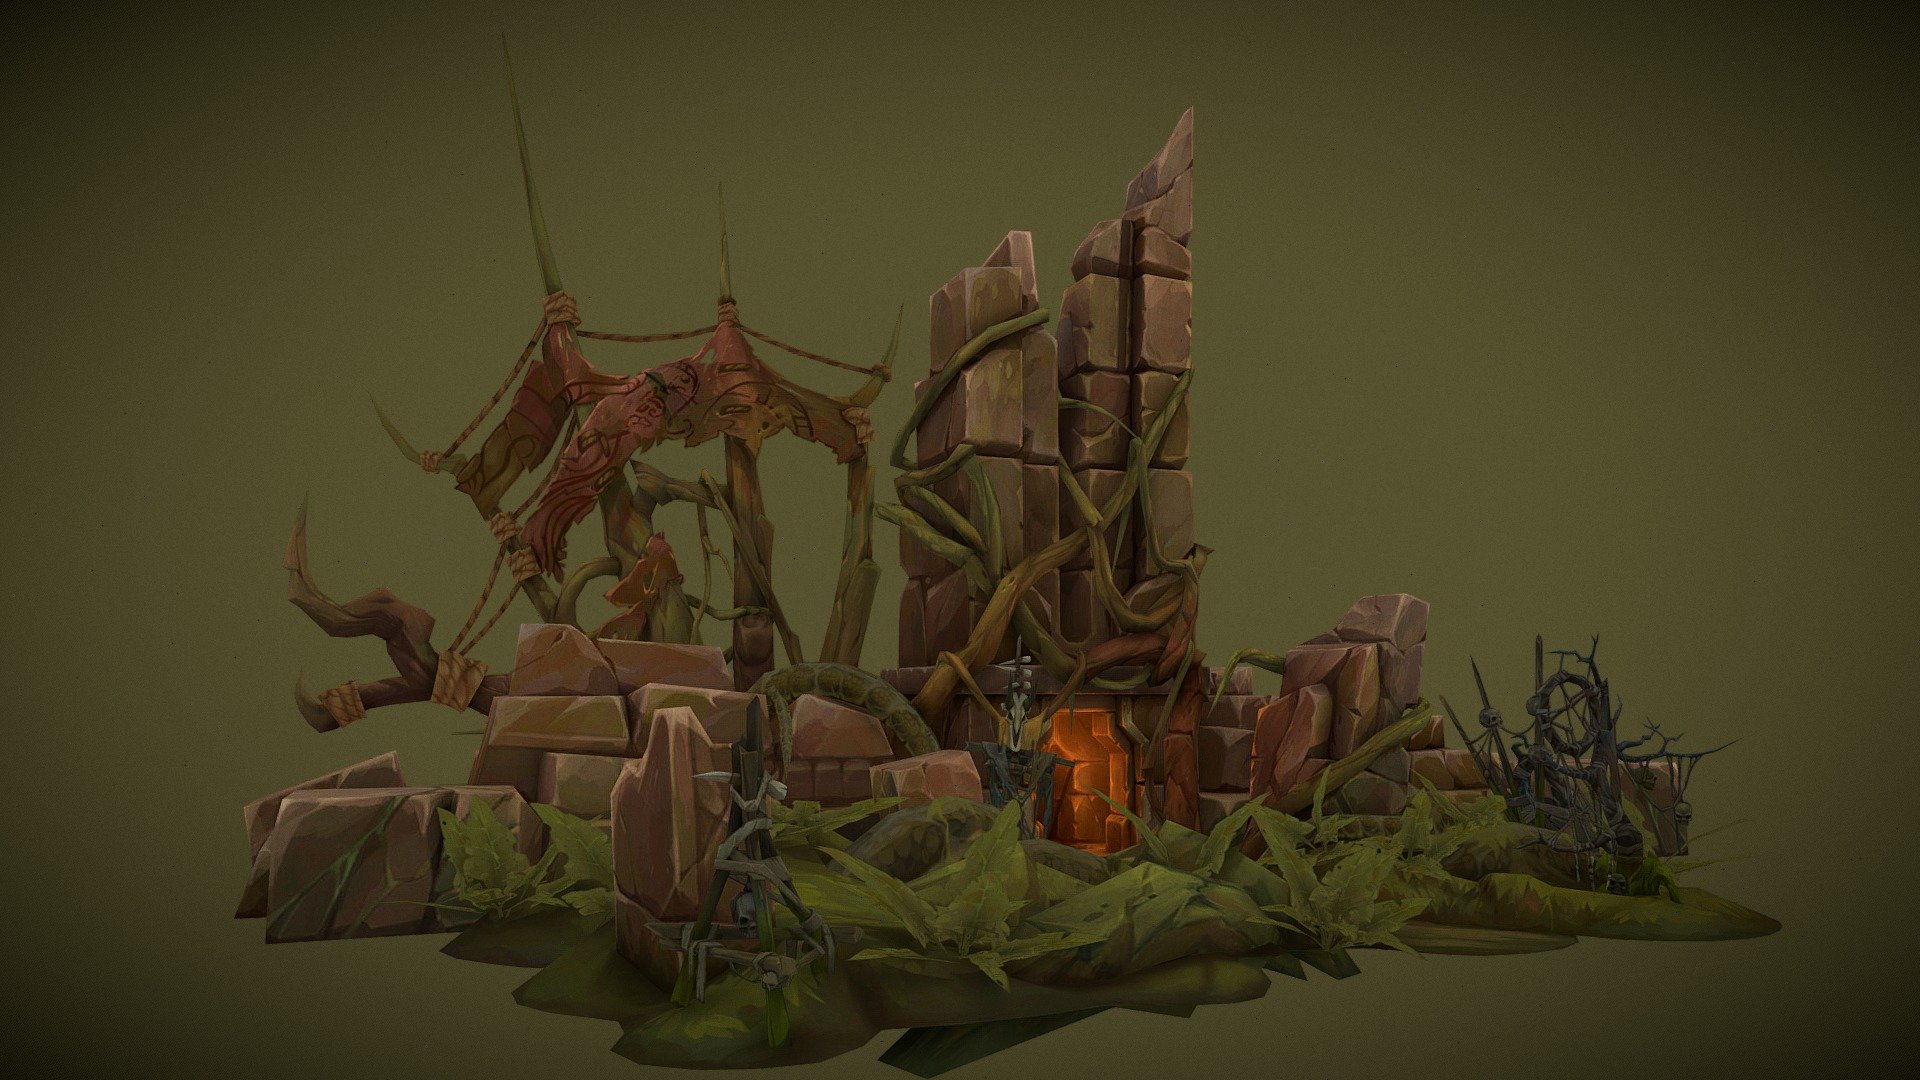 Withc Hut

Ancient ruins of dwarves in the swamps. Witch house.

Eon Games/Vizor Games all right reserved - WitchHut - 3D model by Andrey (@fruitmamba) 3d model